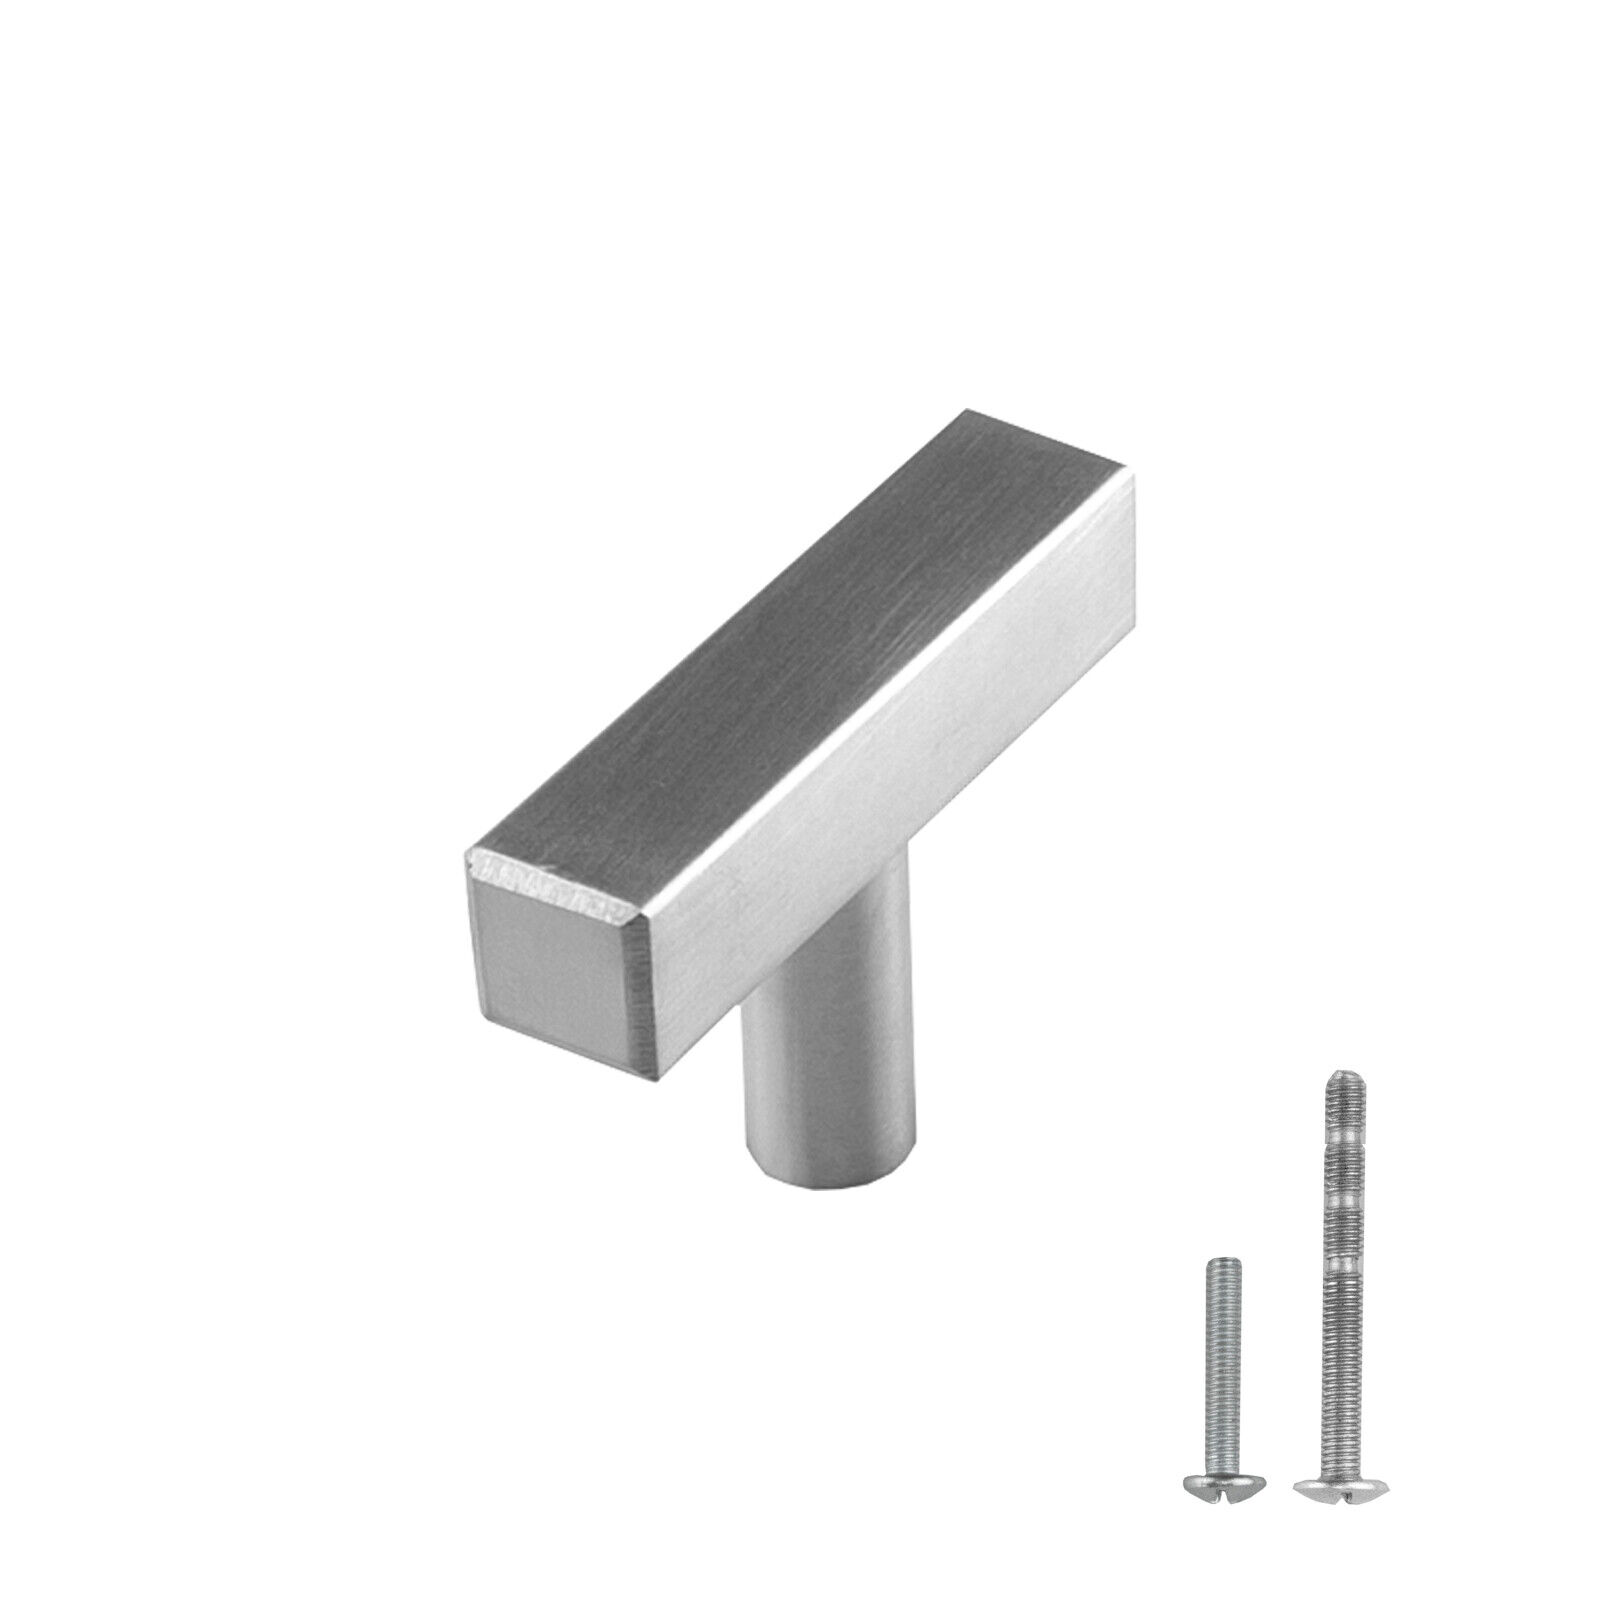 Brushed Nickel Square Modern Cabinet Handles Pulls Knobs Kitchen Stainless Steel